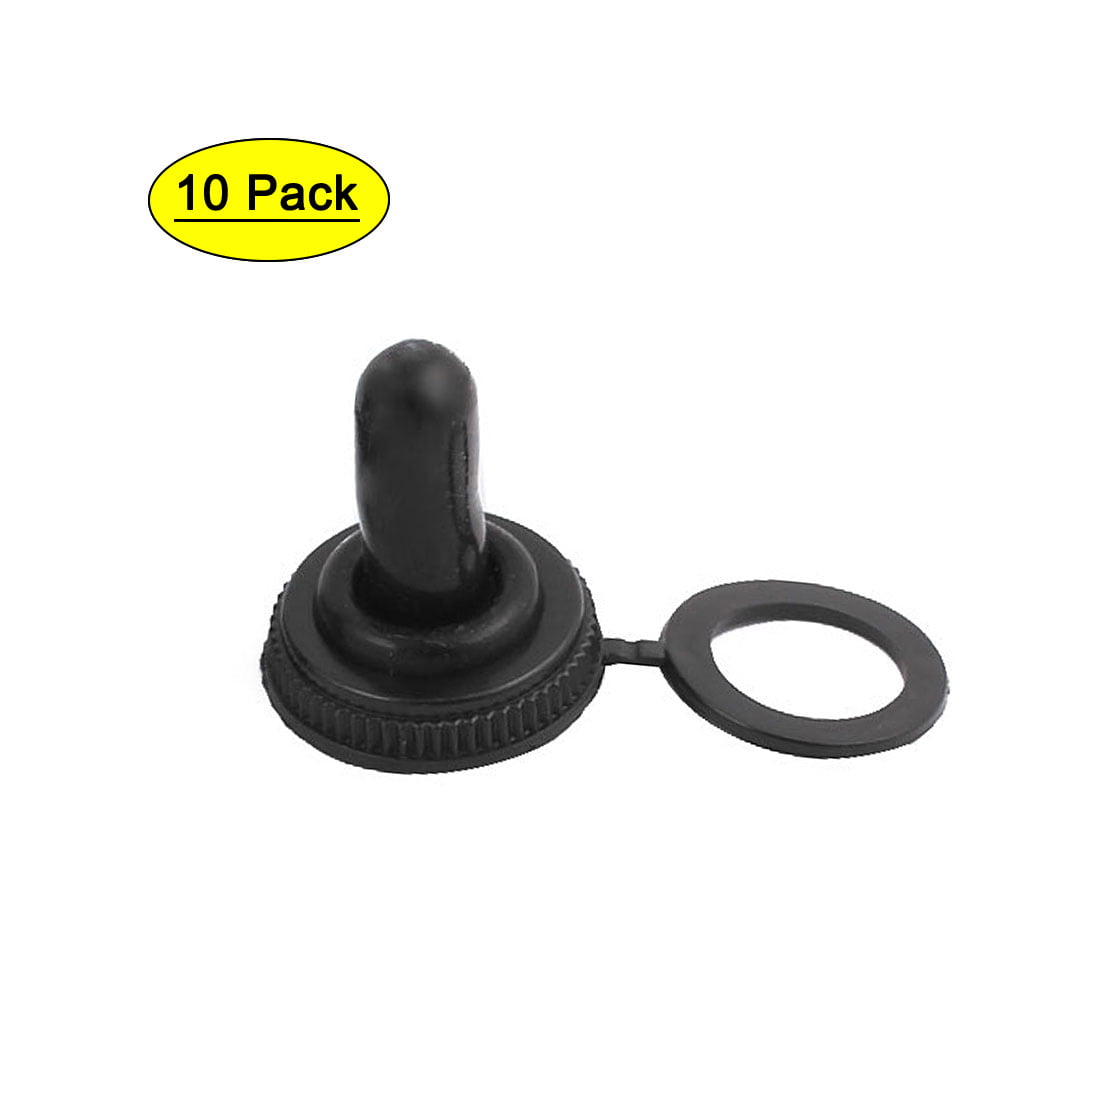 4x Car Toggle Switch Boot 12mm Rubber Waterproof Cover Cap Ip67 T700-2 BLK for sale online